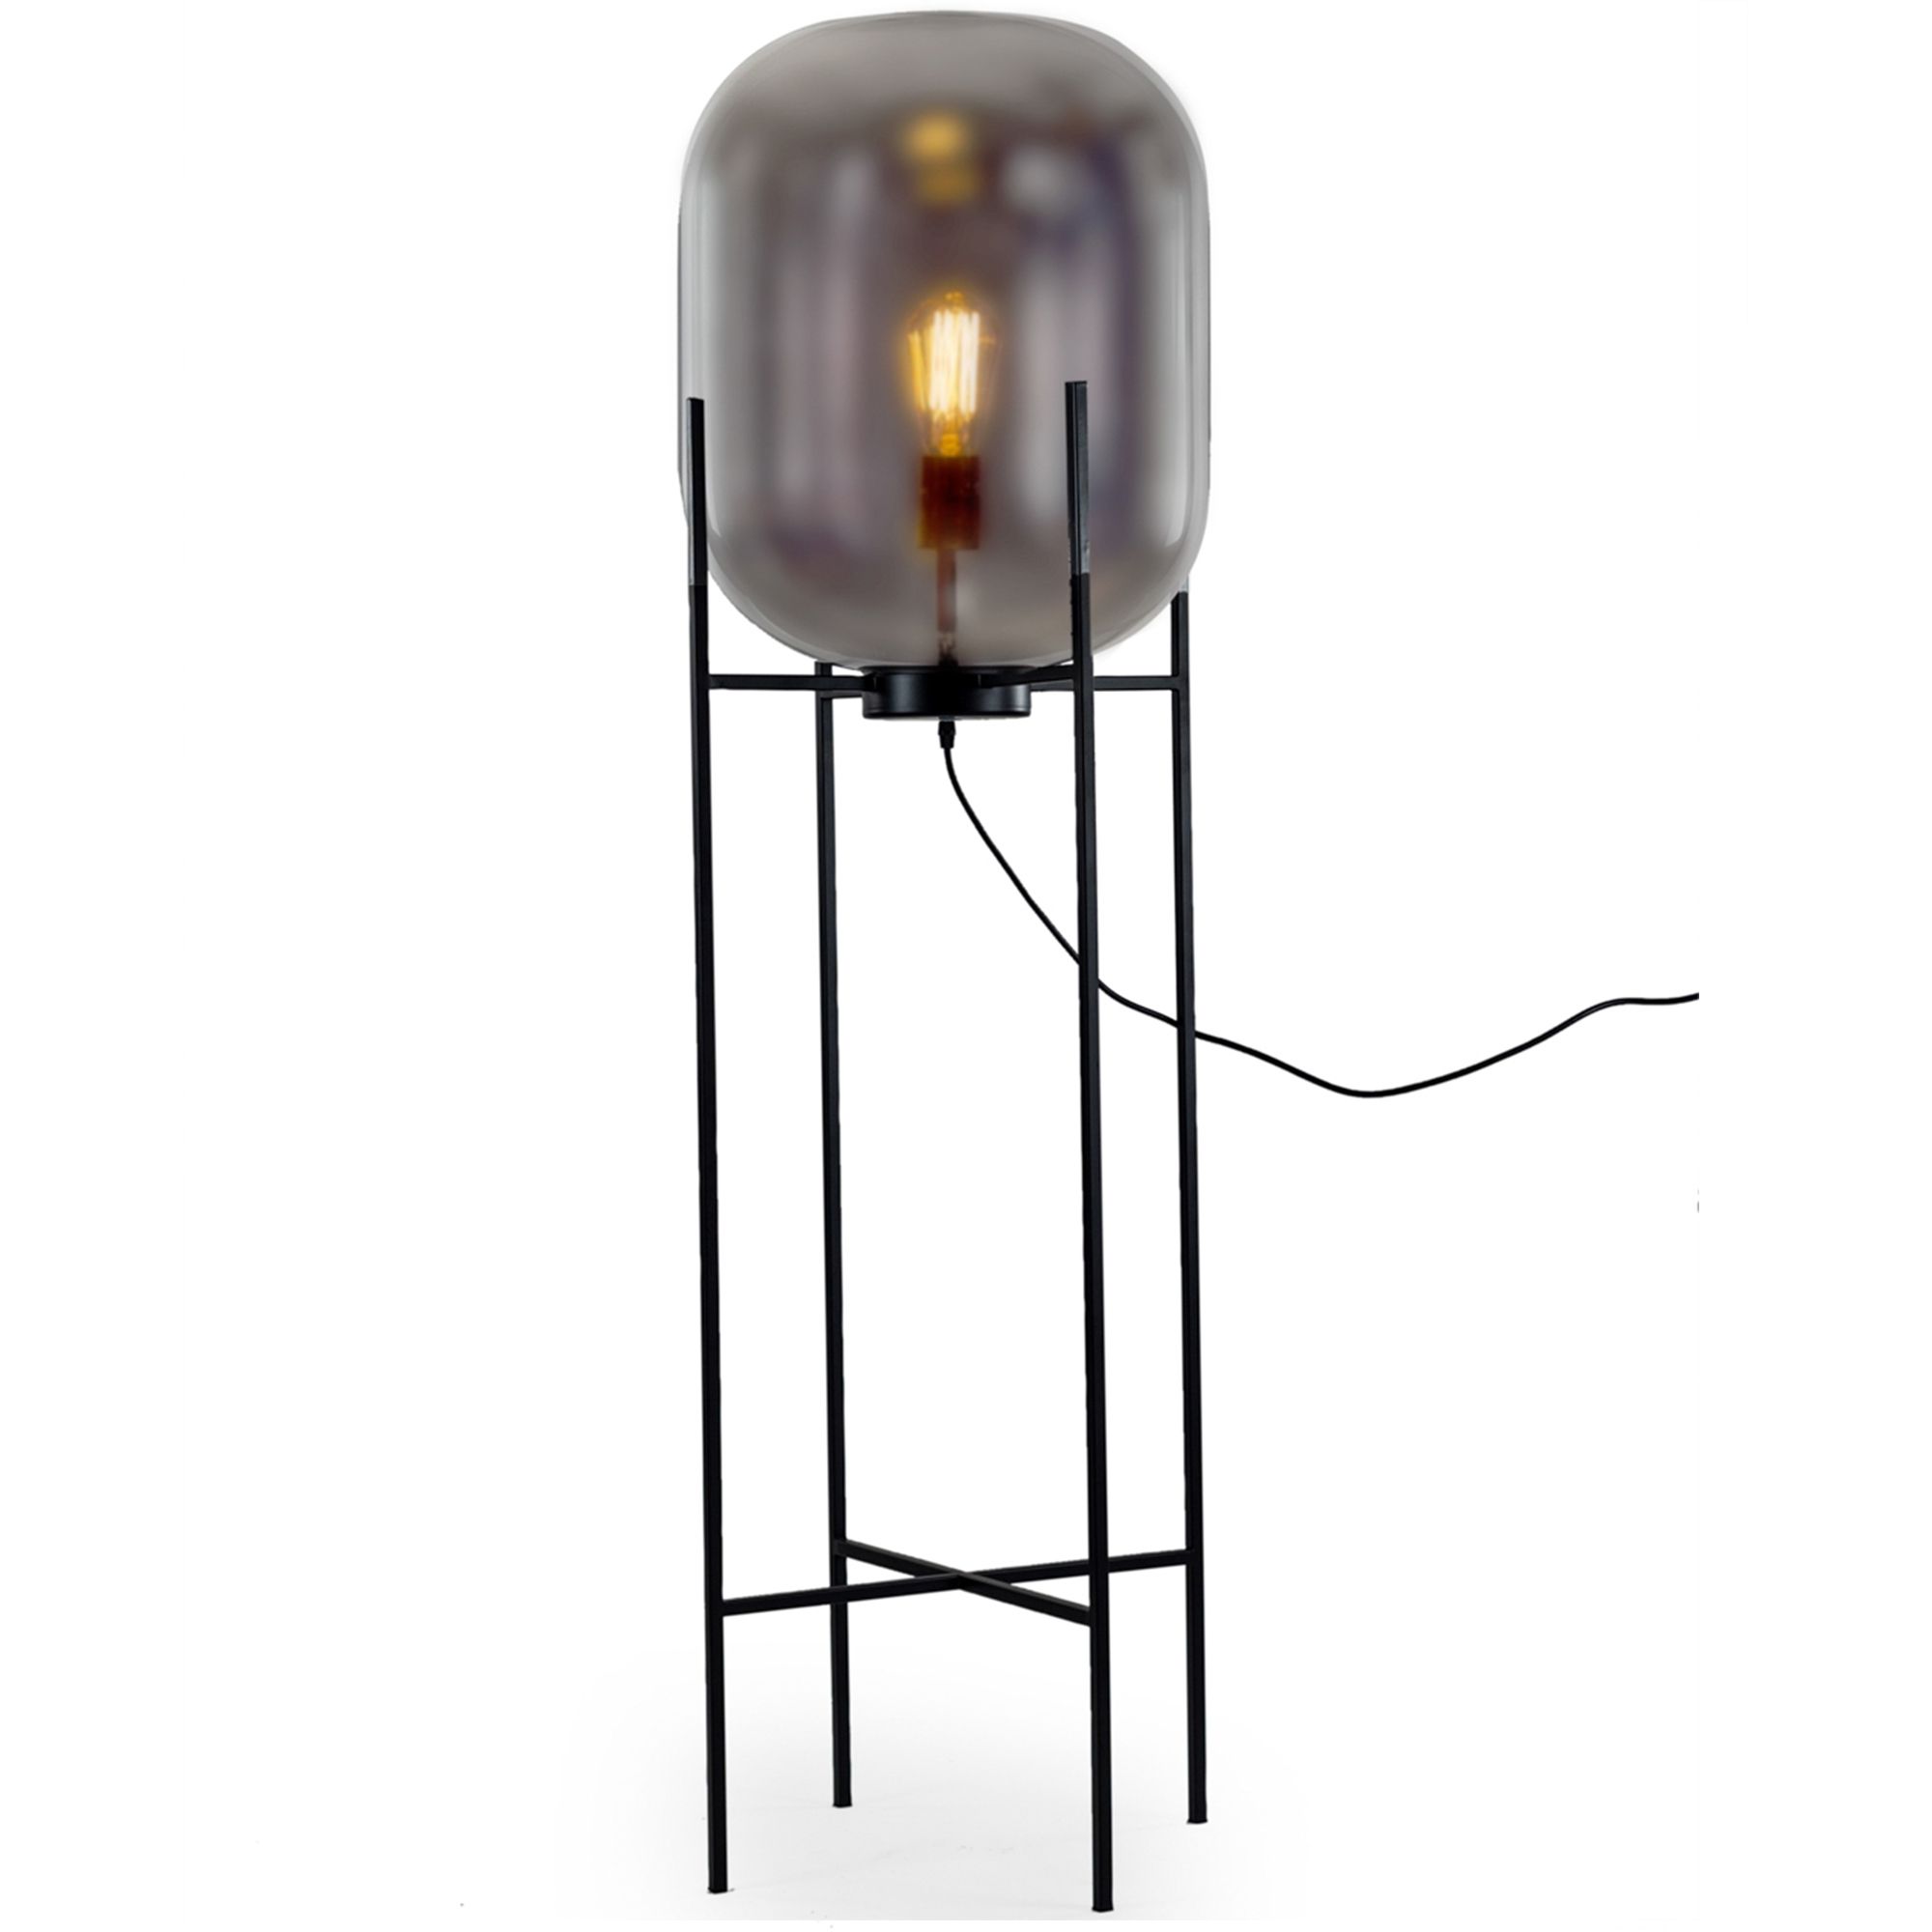 Large Smoked Glass Edison Floor Lamp | Online Floorstanding Lamps In Smoke Glass Floor Lamps (View 2 of 20)